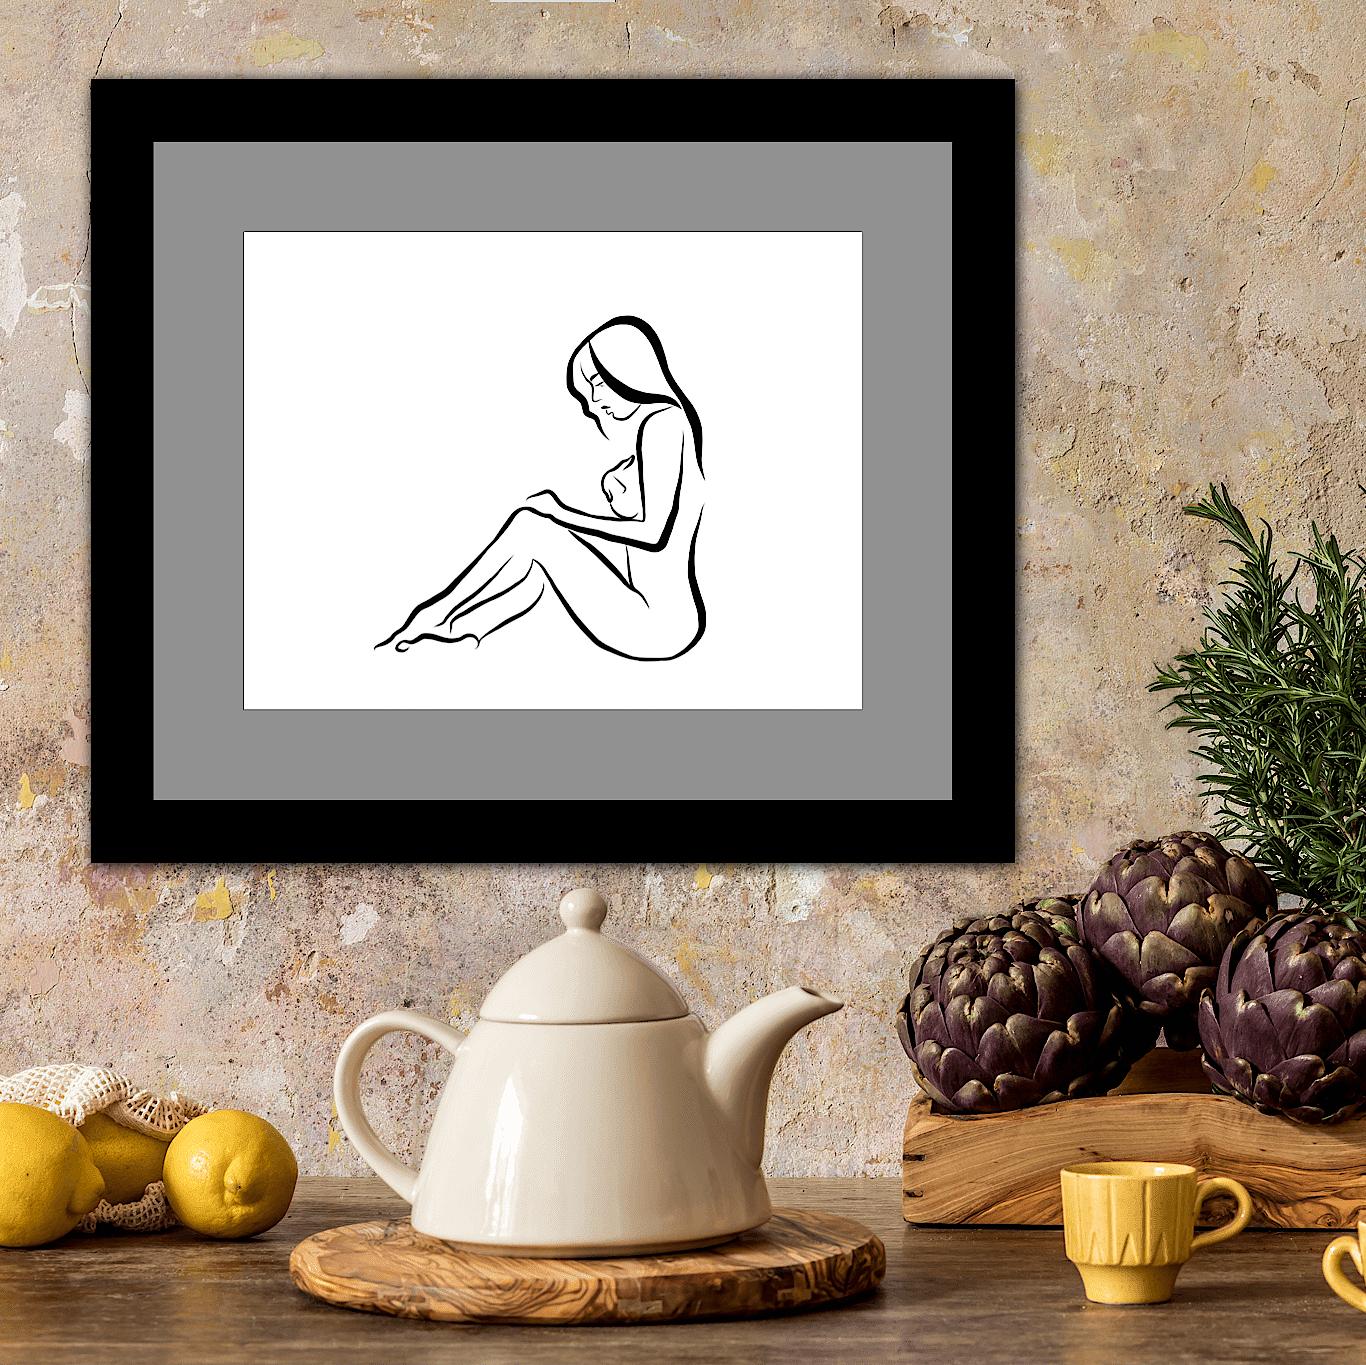 Haiku #21 - Digital Vector Drawing Seated Female Nude Woman Figure Cover Breast

This is a limited edition (50) digital black & white print of a seated female nude, executed in 17 vector lines. It is part of a series called Haiku, after the style of